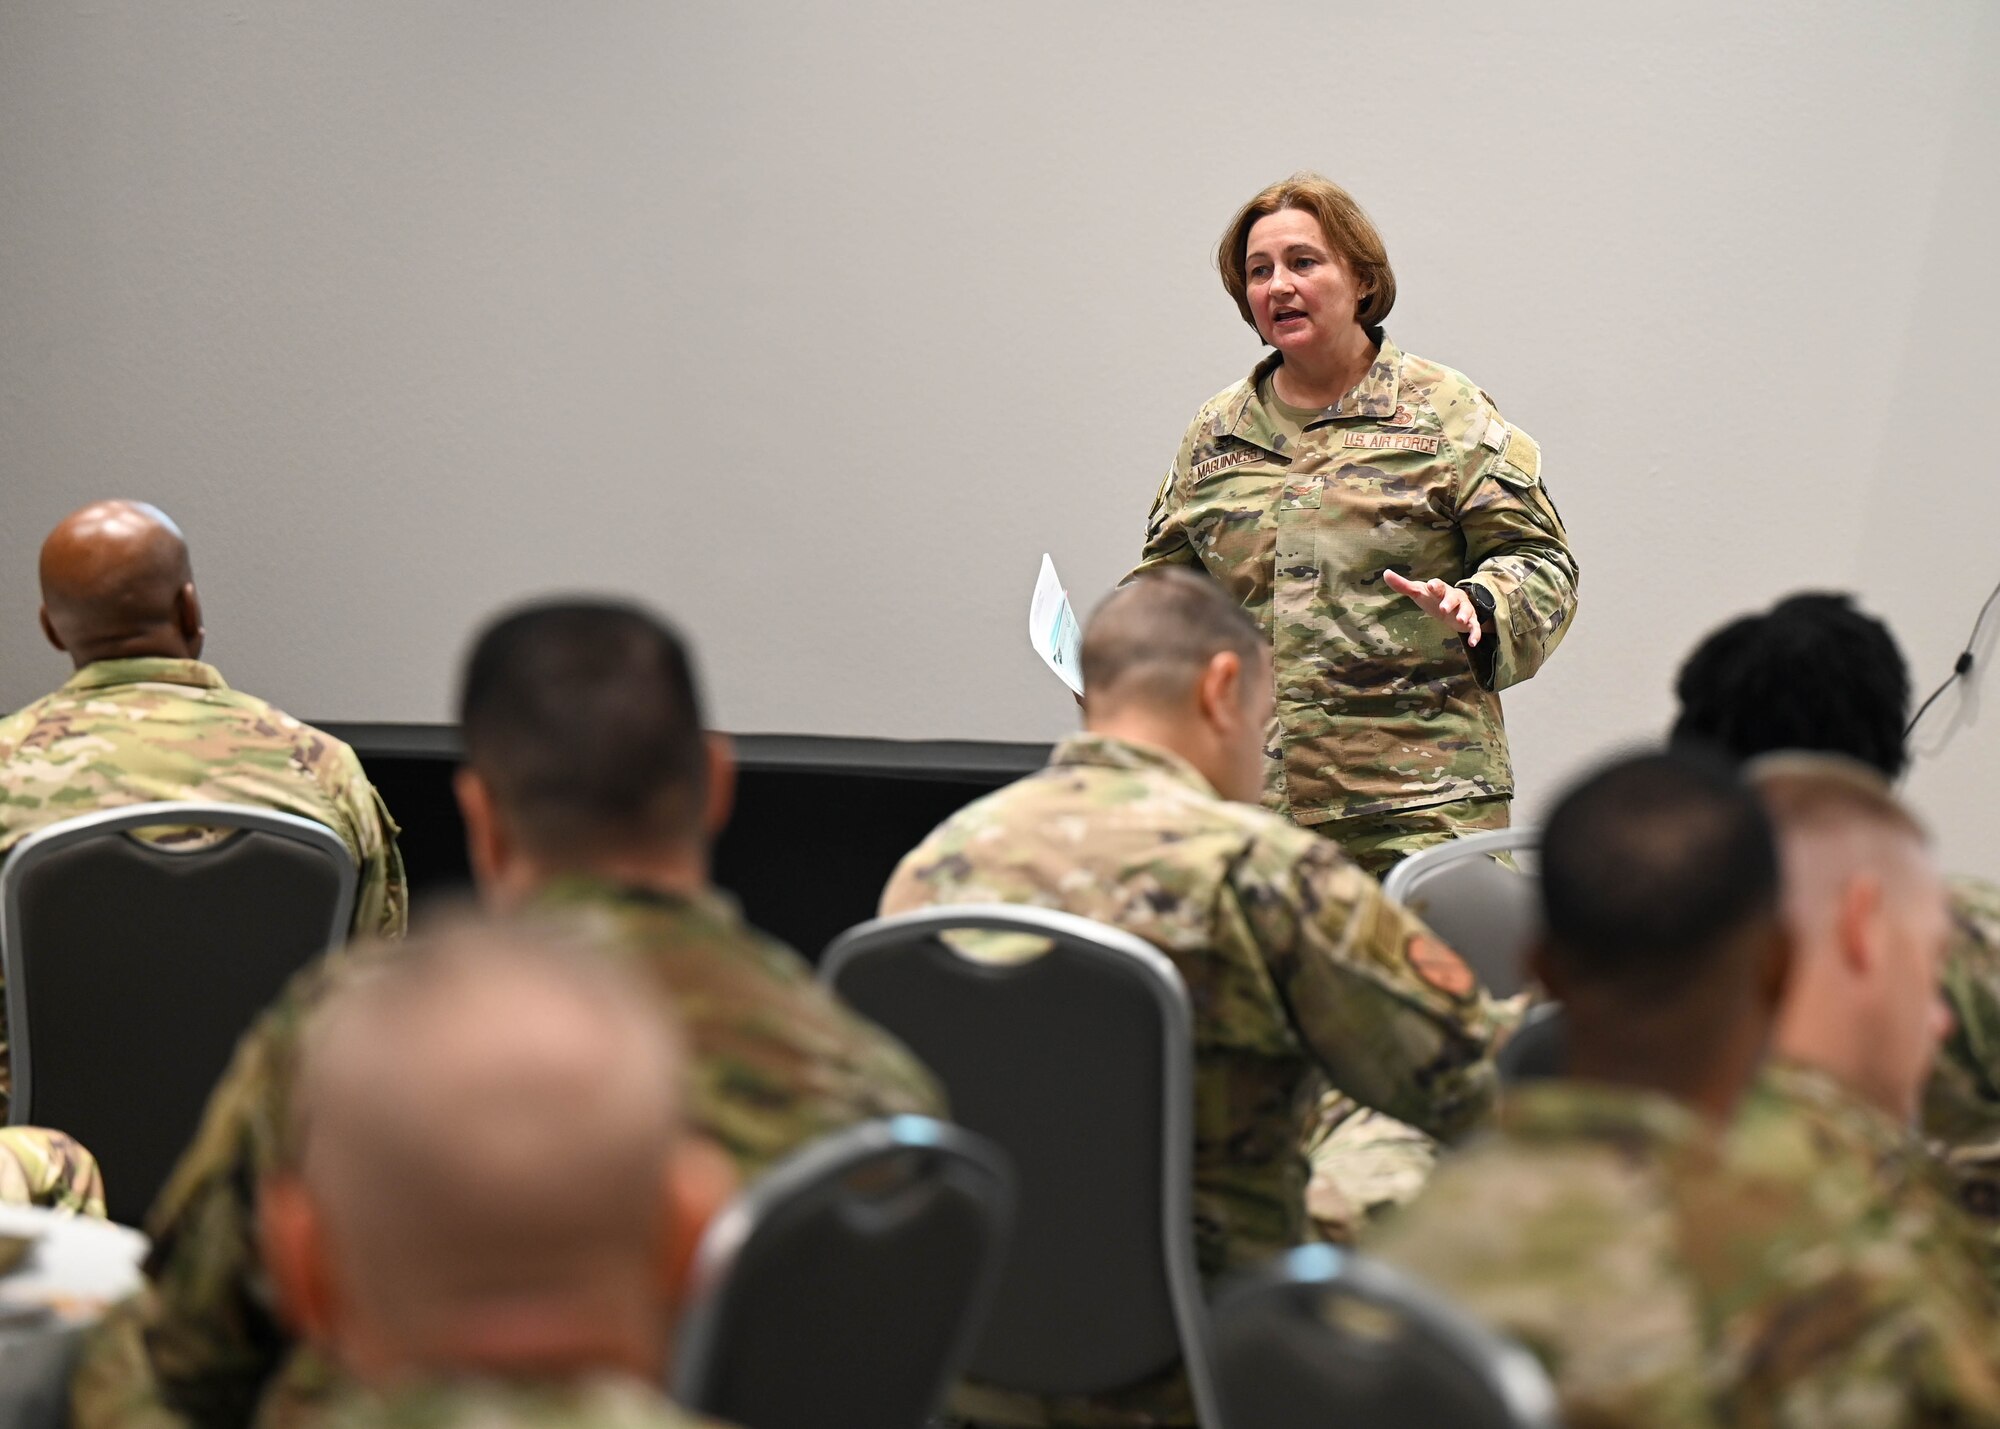 U.S. Air Force Col. Angelina Maguiness, 17th Training Wing commander, speaks during the Senior Leader Summit at the Powel Event Center, Goodfellow Air Force Base, Texas, July 26, 2023. The leaders discussed the importance of supporting young Airmen’s core pillars and shared perspectives on how to implement new outlets for students and permanent party to thrive mentally and physically. (U.S. Air Force Photo by Airman 1st Class Zach Heimbuch)